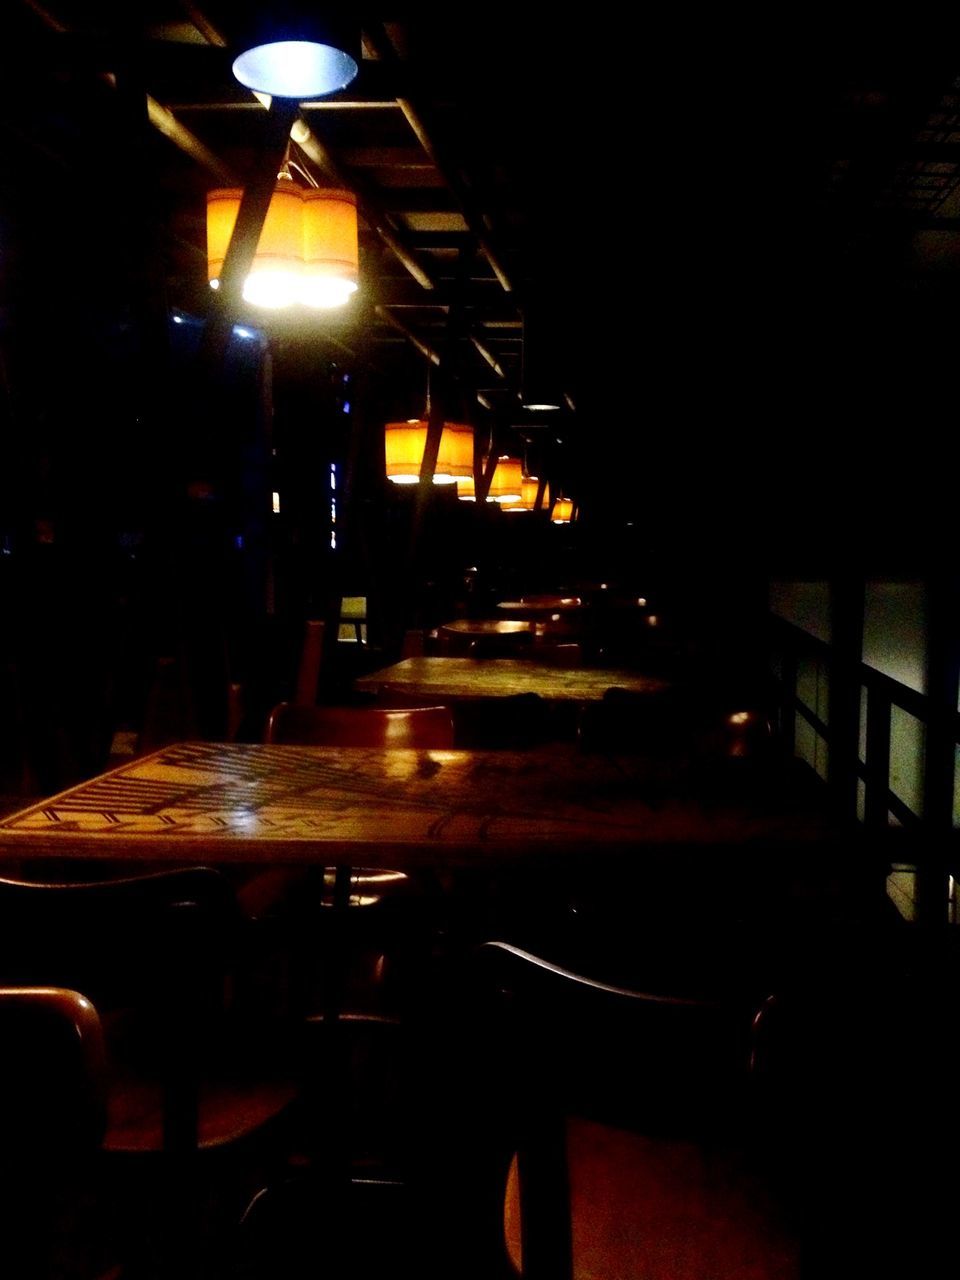 illuminated, indoors, night, lighting equipment, dark, empty, absence, electric lamp, lit, light - natural phenomenon, chair, electric light, table, lamp, glowing, restaurant, home interior, no people, electricity, light